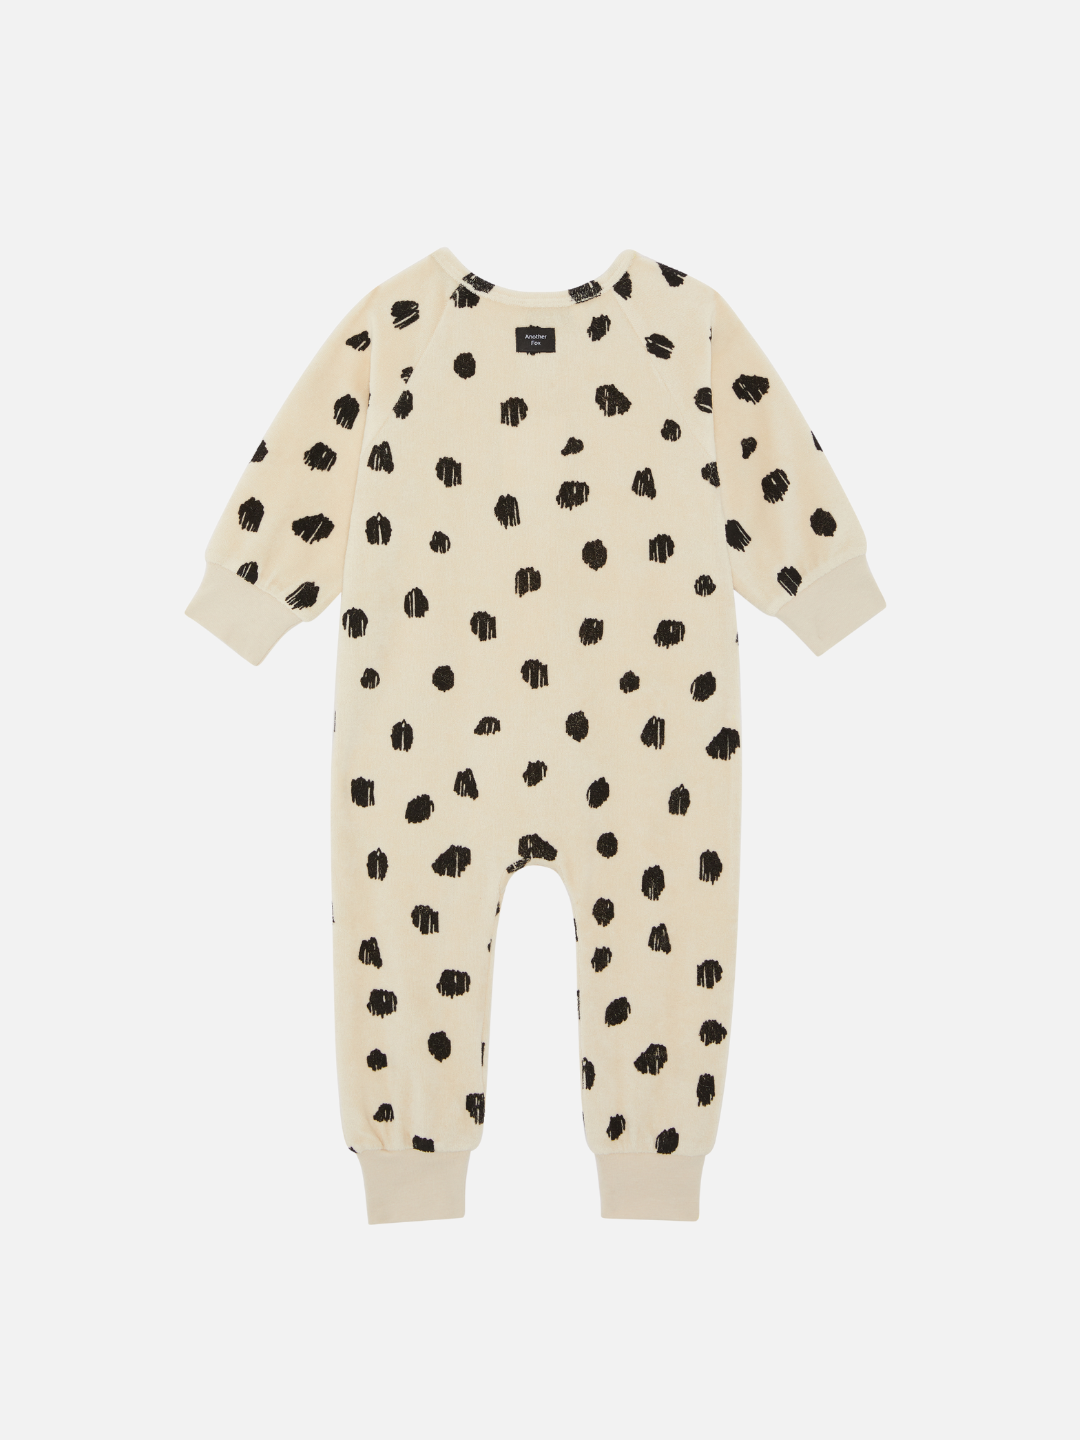 Back view of the baby Cheetah Terry Towel Sleepsuit.